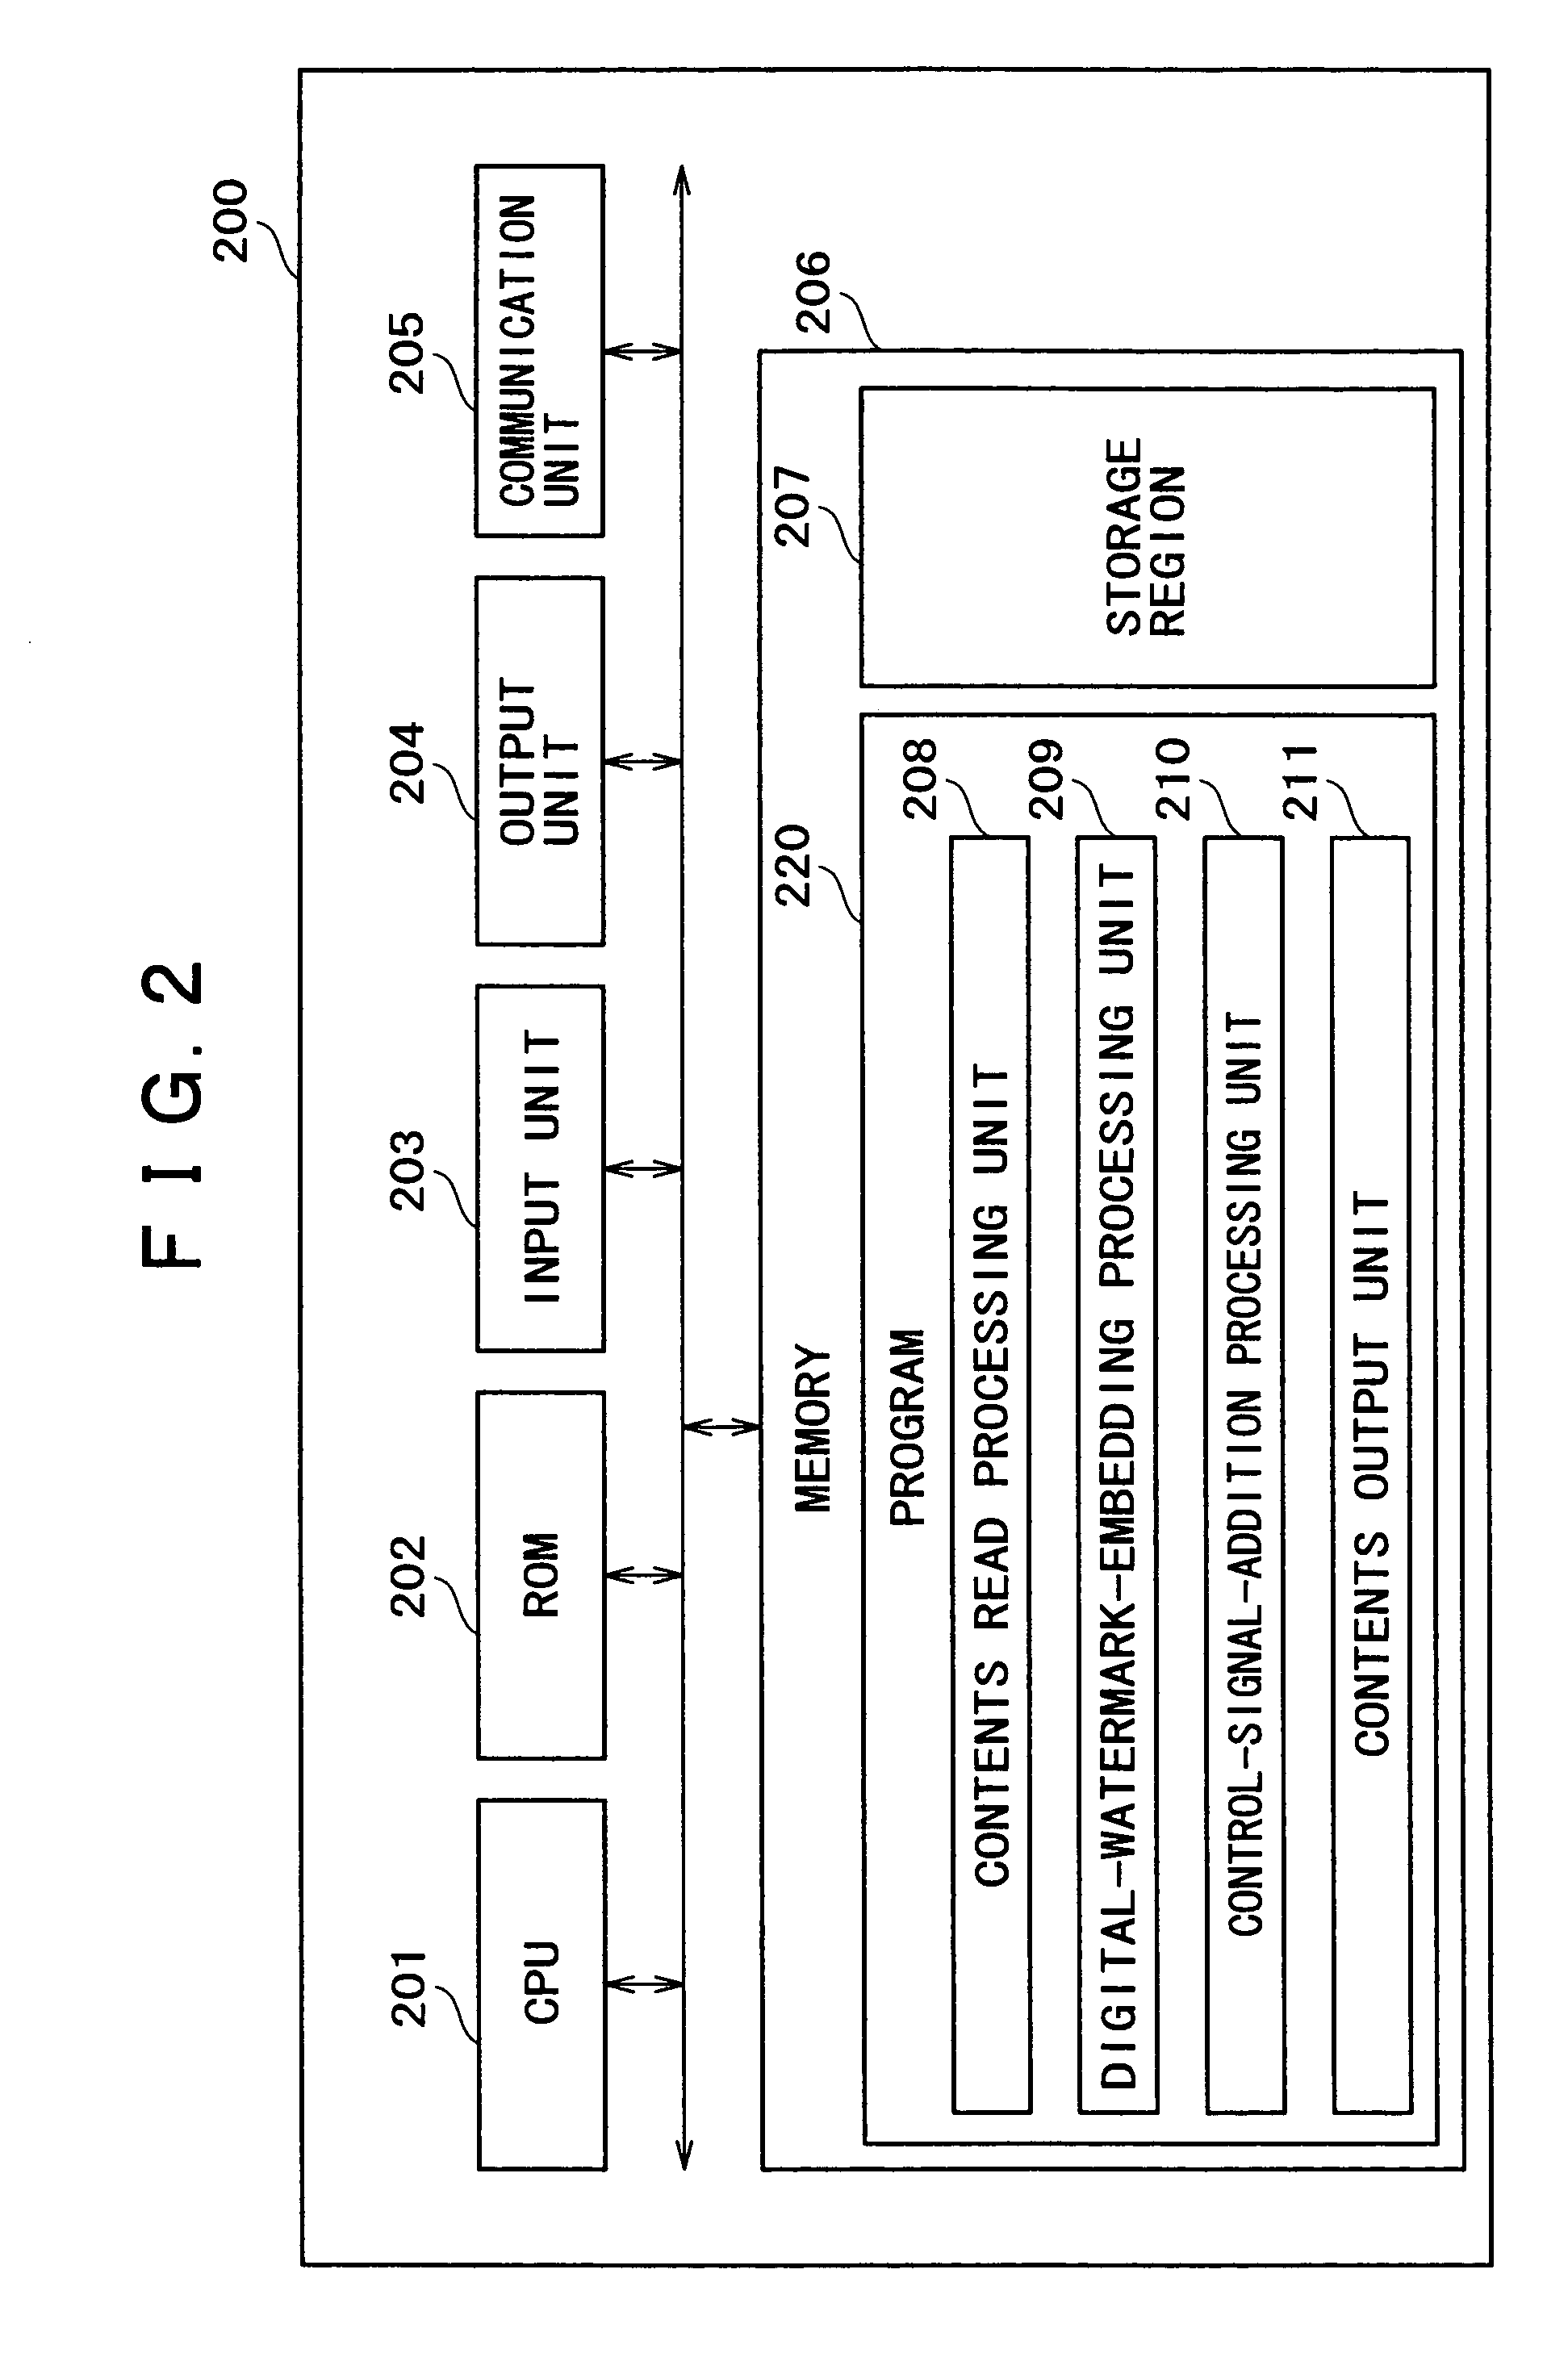 System and method for controlling contents by plurality of pieces of control information